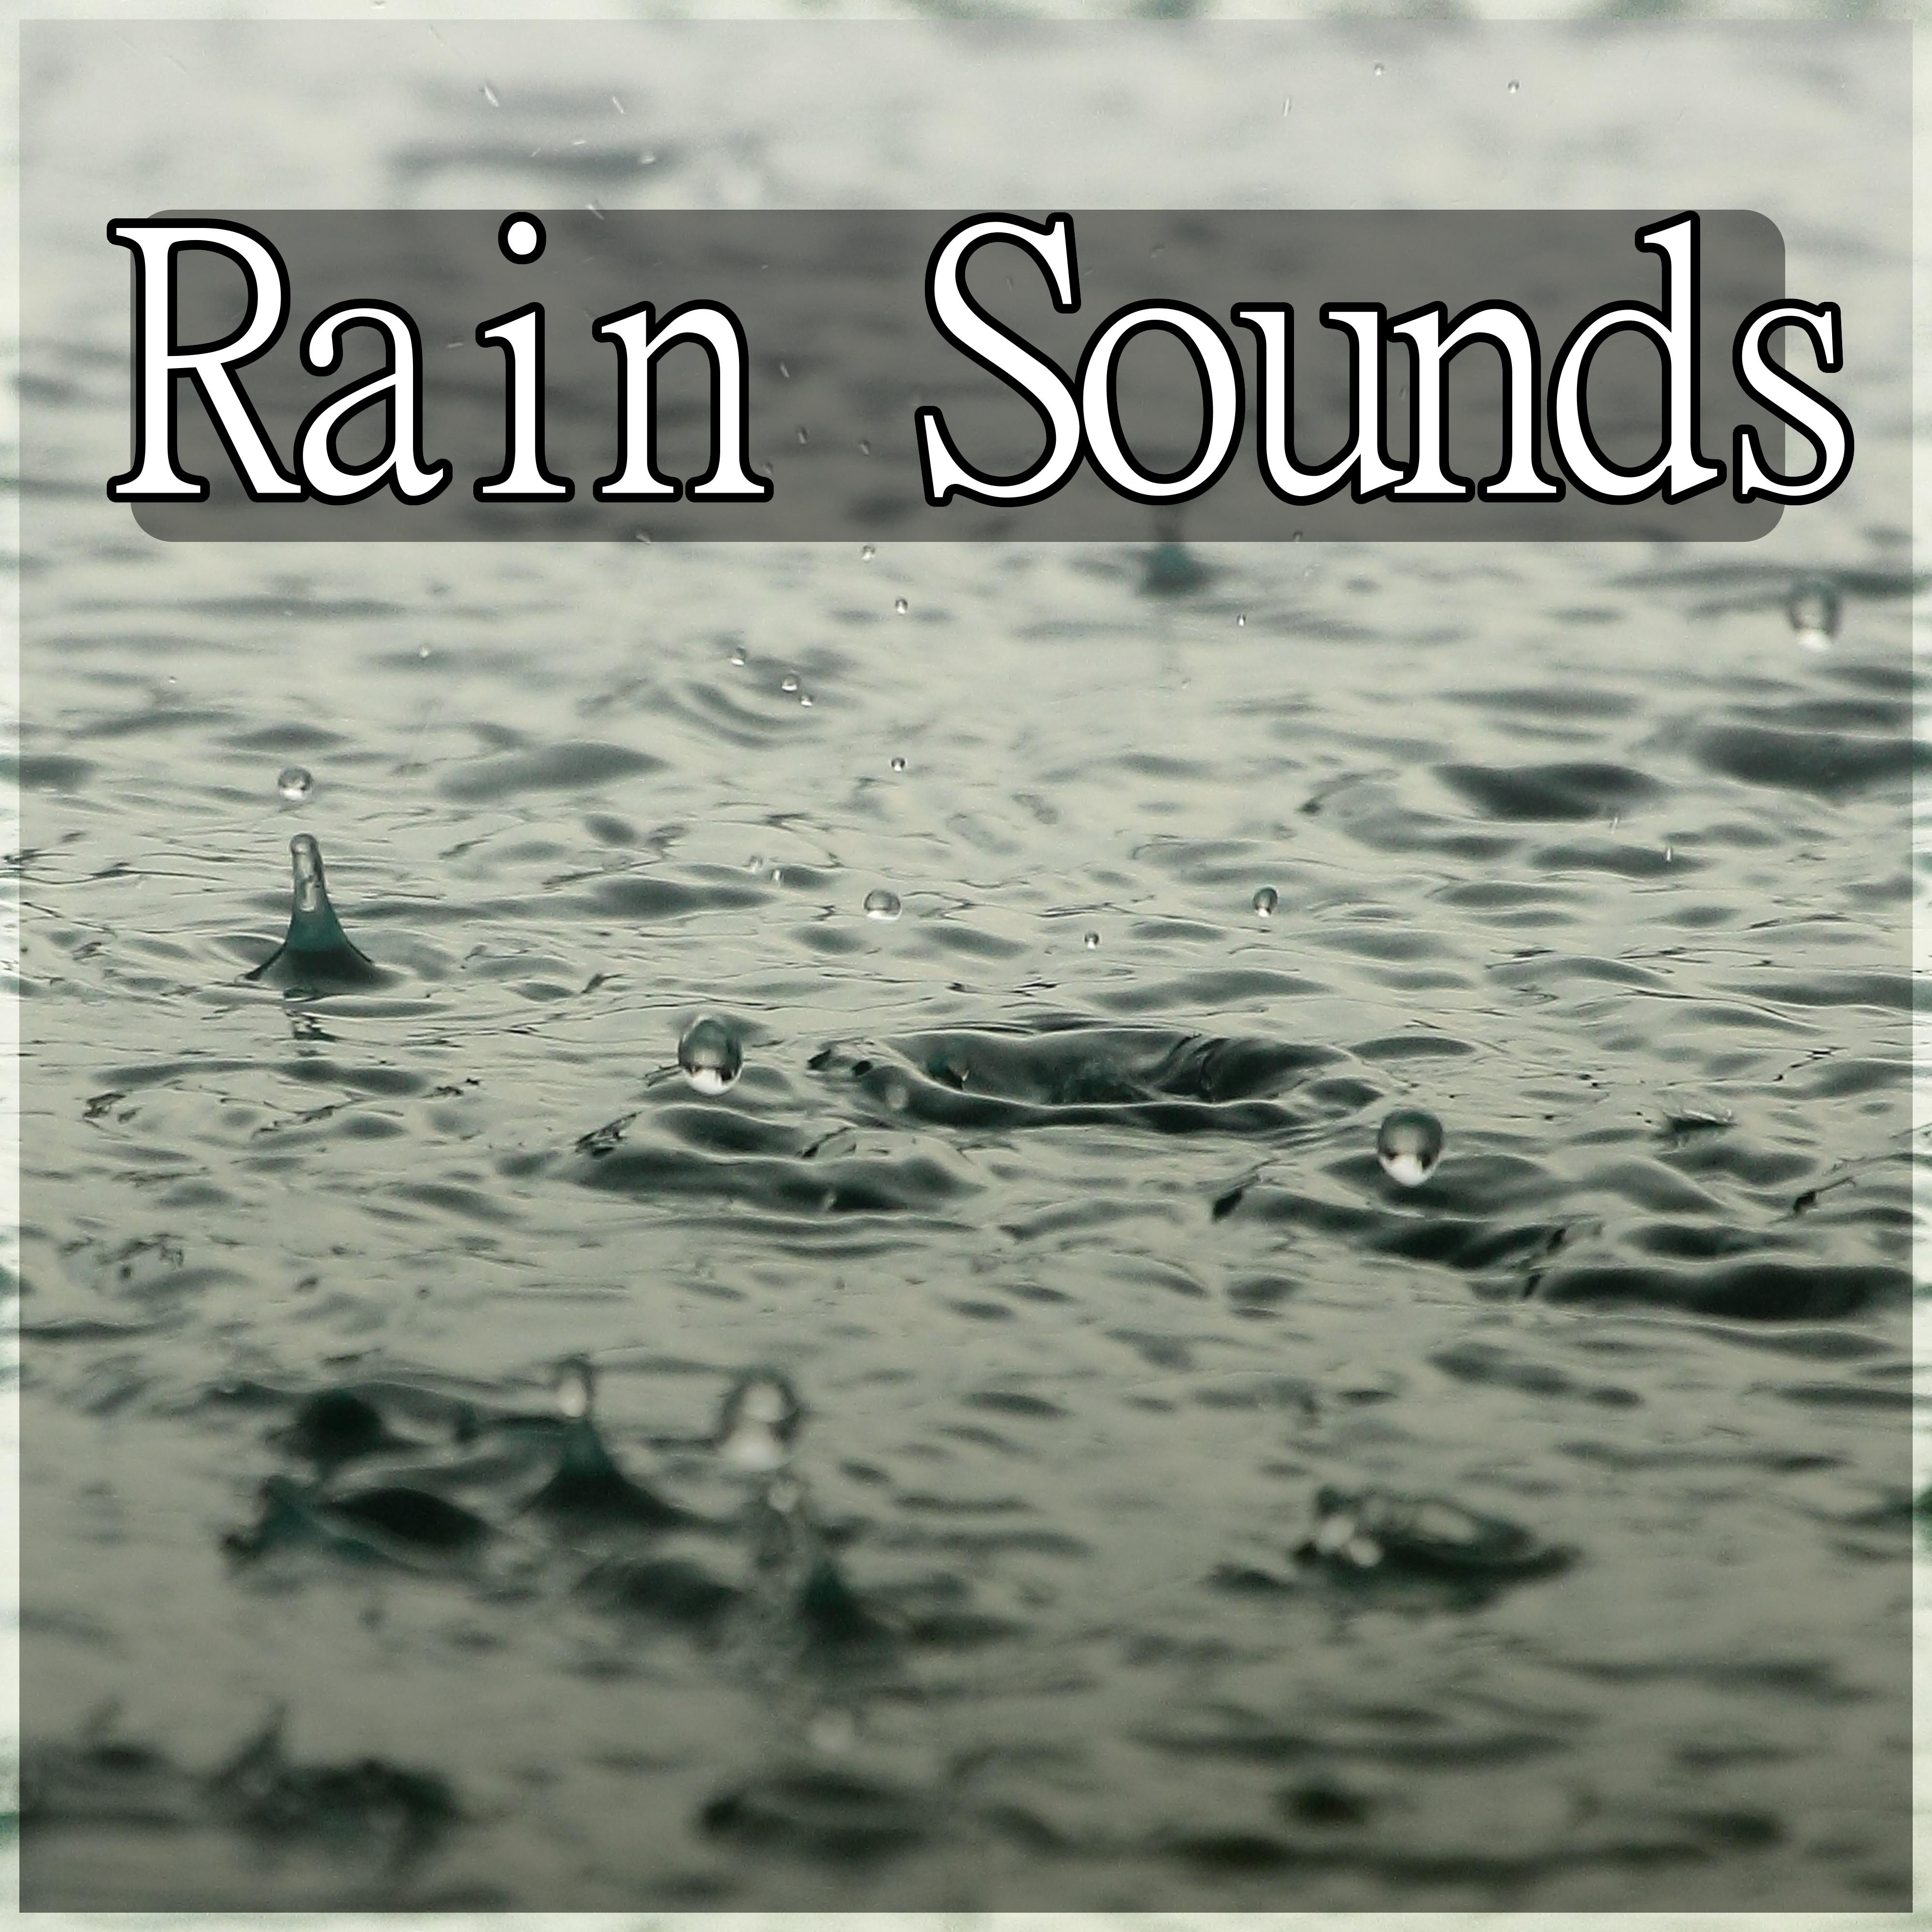 Rain Sounds - Ambient Music for Therapy, Serenity Spa, Healing Massage, Meditation & Relaxation, Music and Pure Nature Sounds for Stress Relief